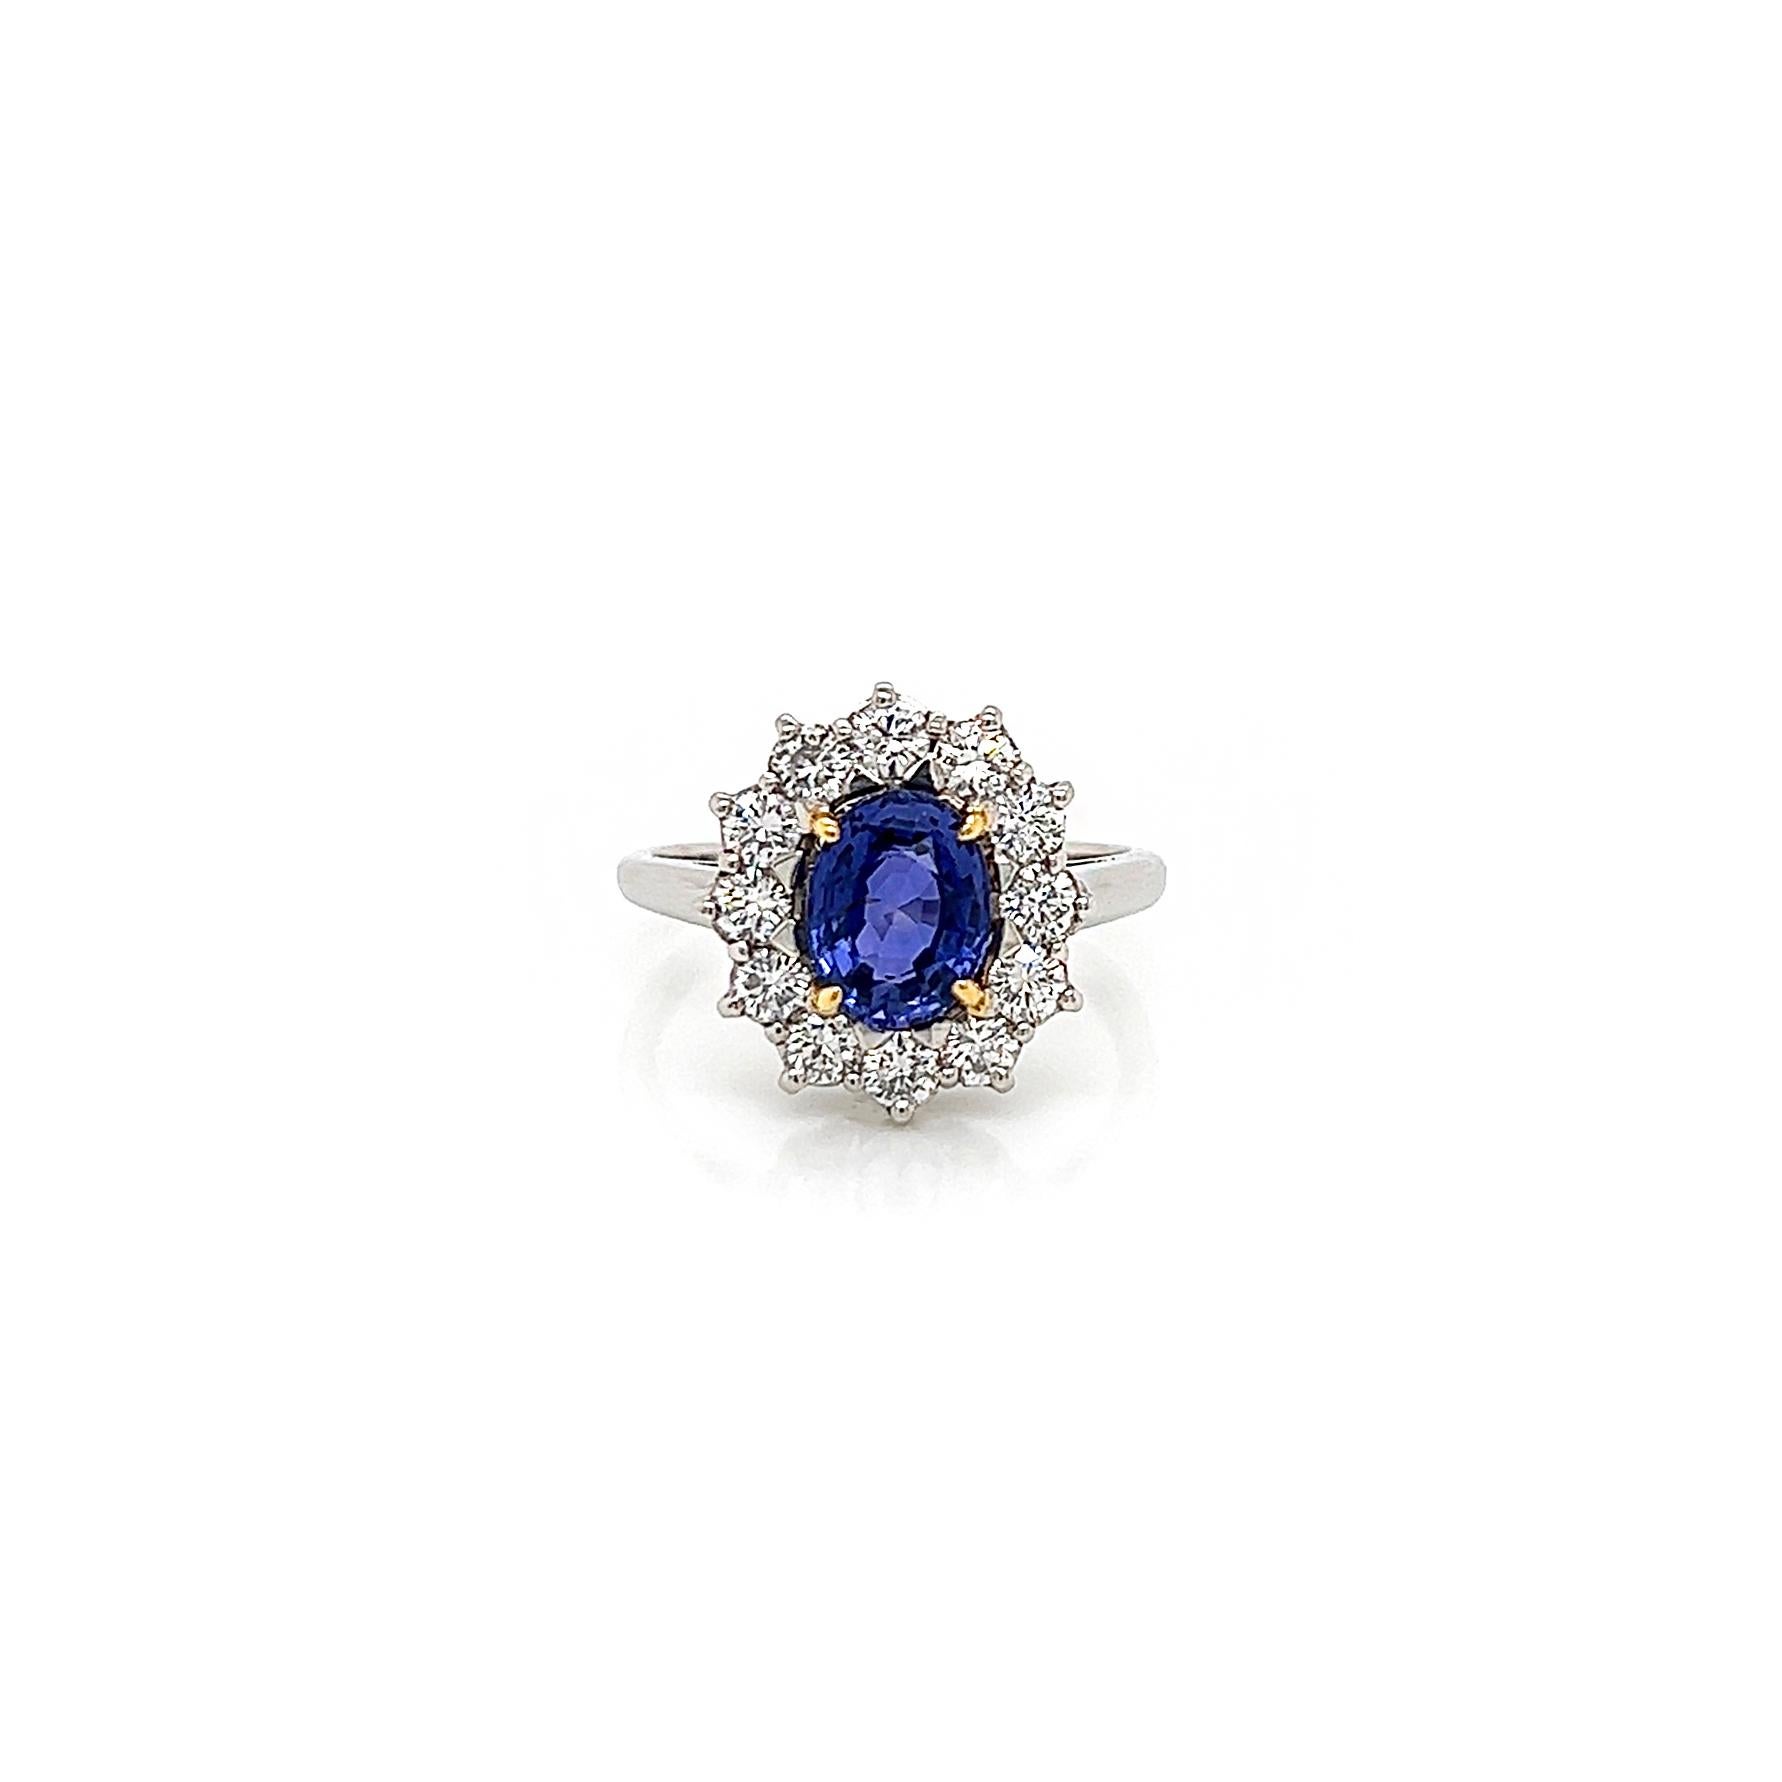 2.76 Total Carat Sapphire and Diamond Halo Ladies Engagement Ring. GIA Certified.

-Metal Type: Platinum
-1.68 Carat Oval Cut Natural NON Heated Blue Sapphire, GIA Certified 
-Sapphire Color: Blue changing to Bluish Violet
-Sapphire Measurements: